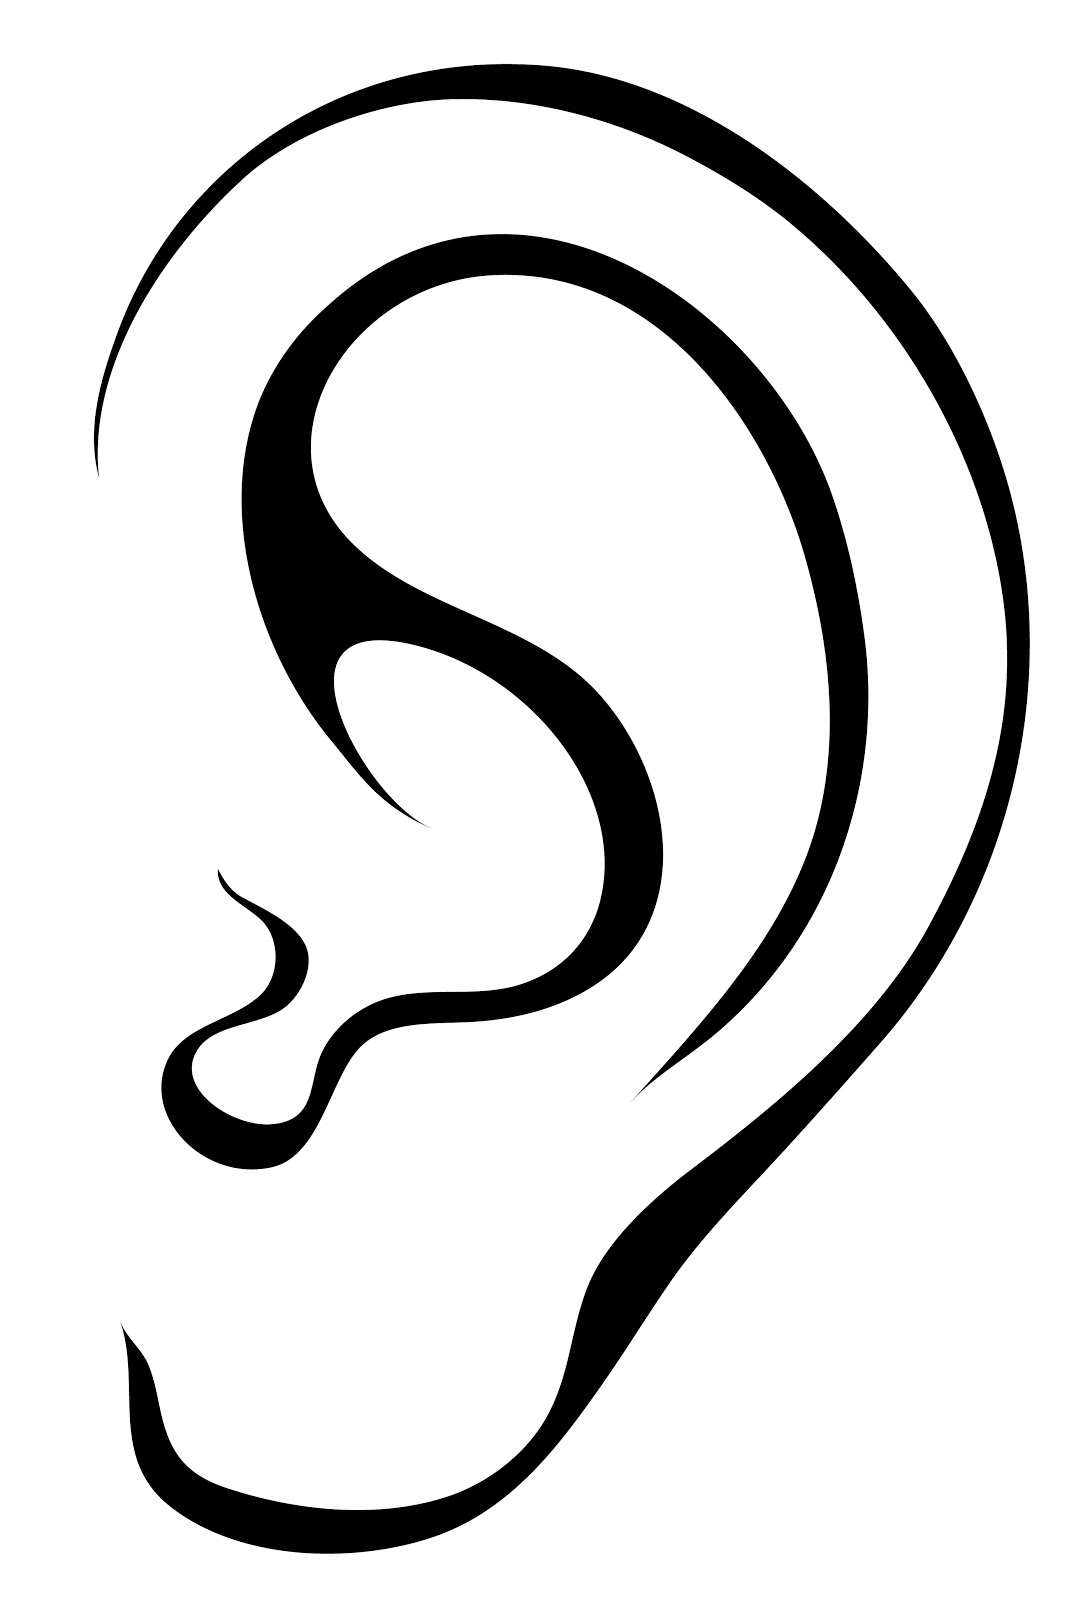 Ear clipart earclipart images